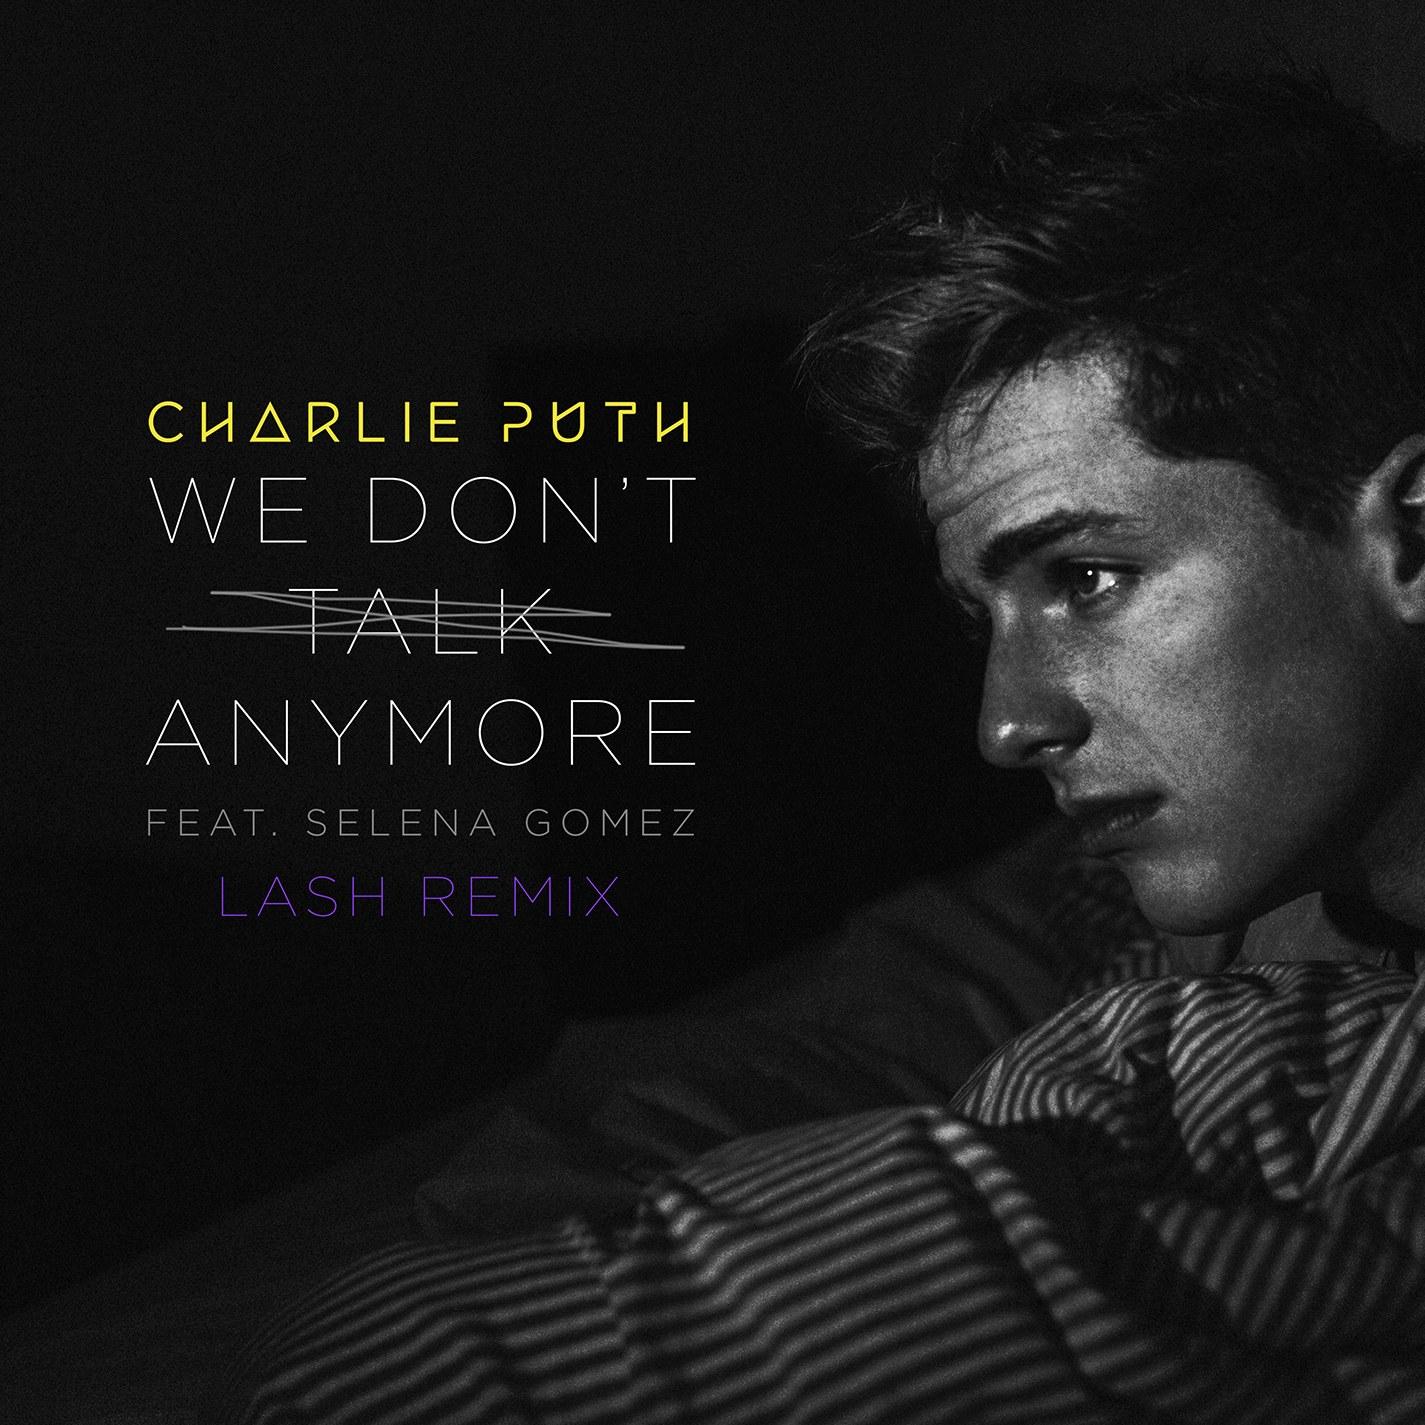 Charlie Puth and Selena Gomez's Duet Just Received the Remix